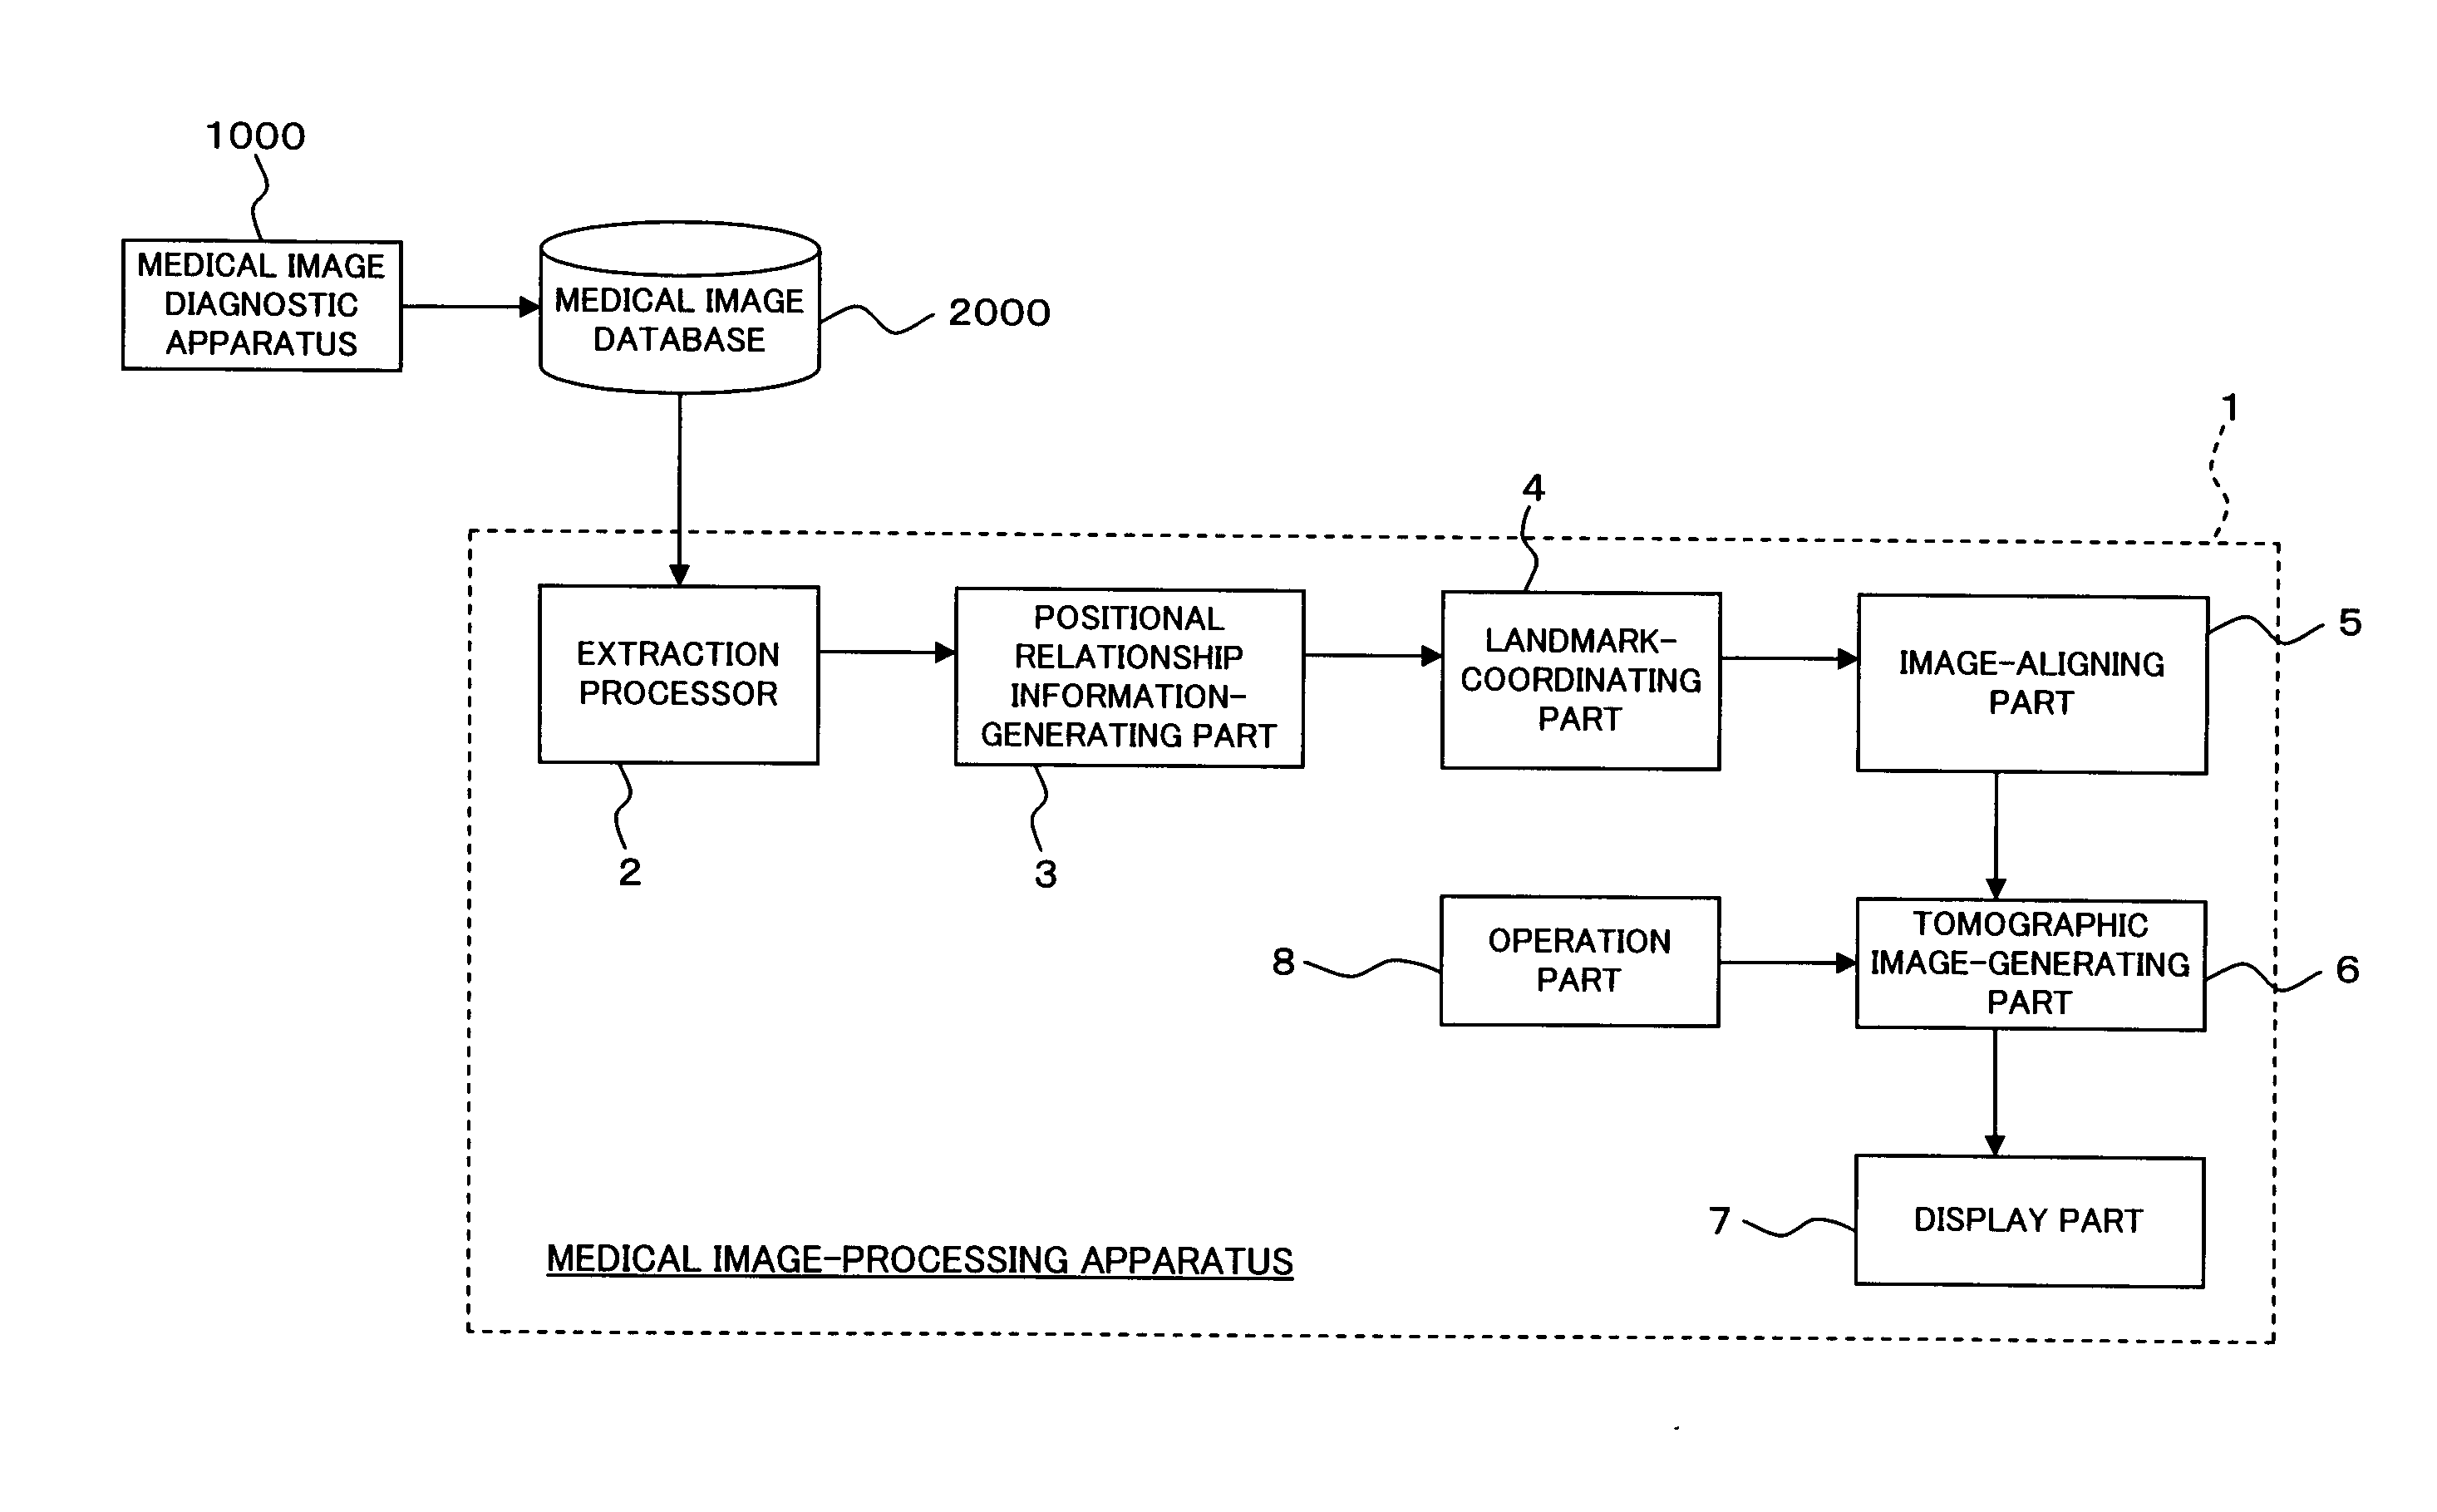 Medical image-processing apparatus and a method for processing medical images